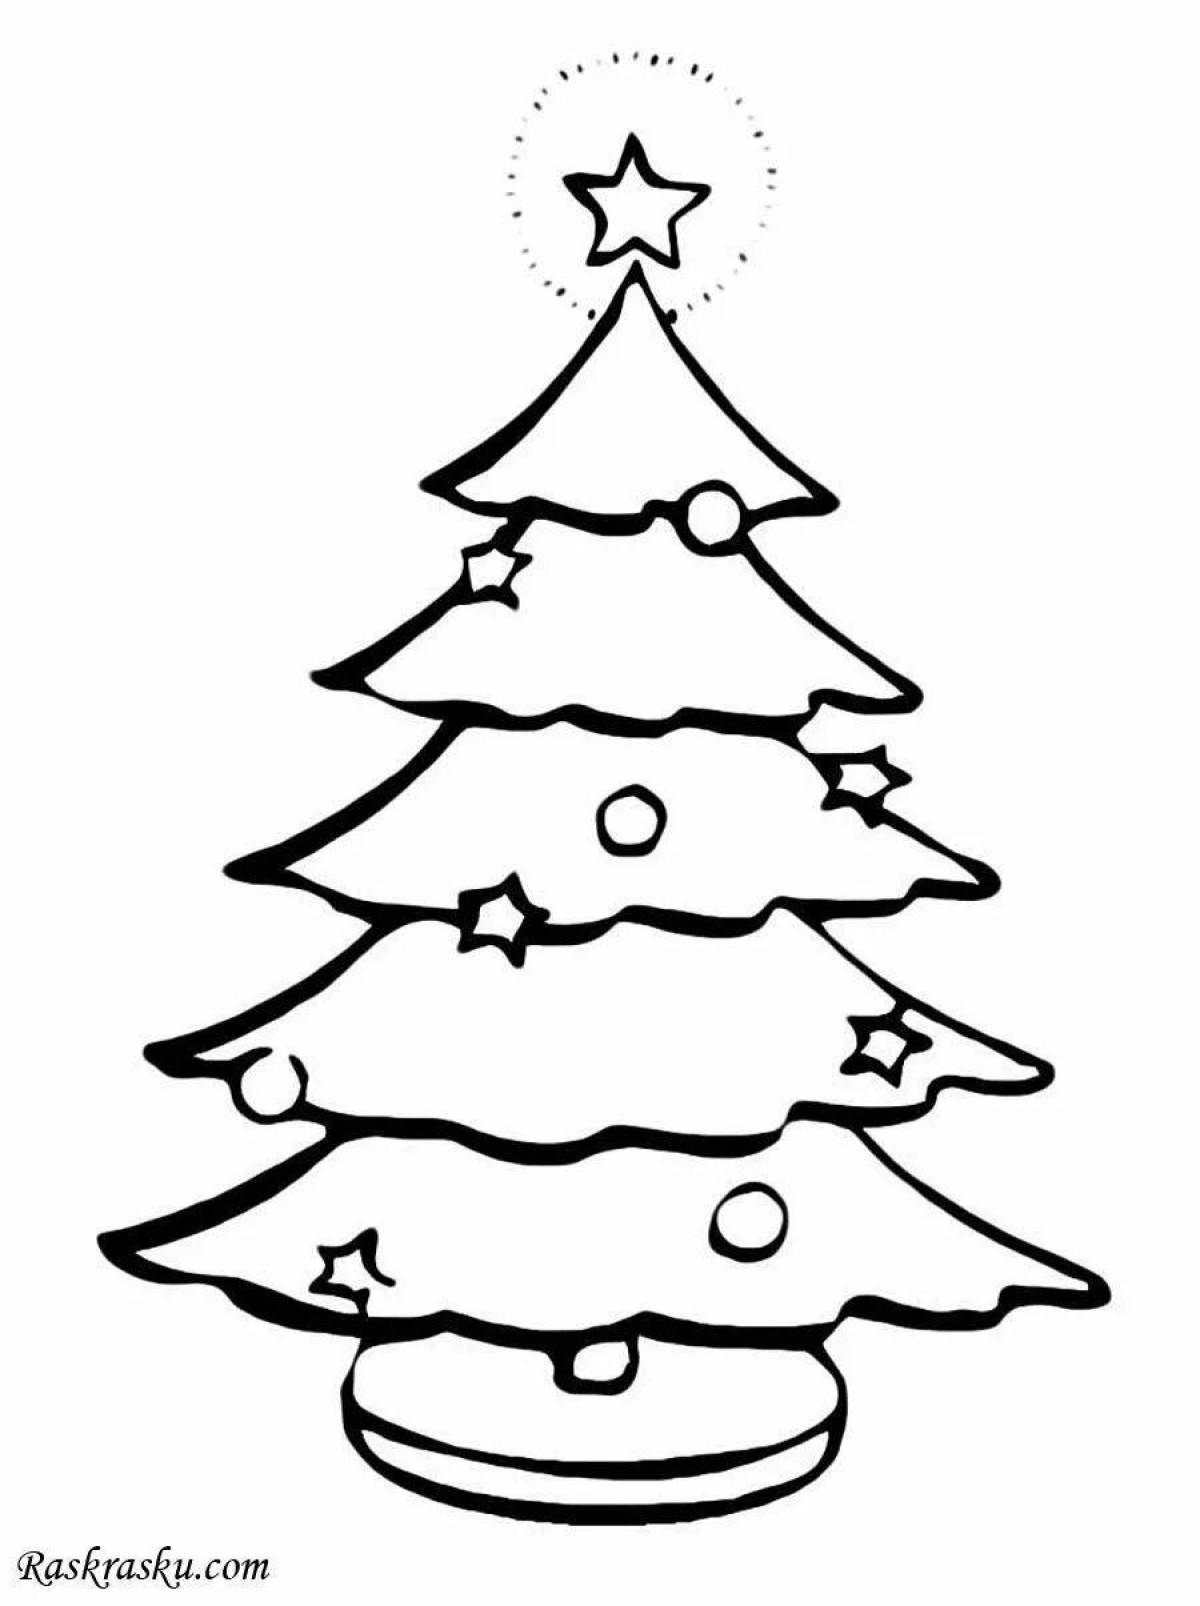 Christmas tree picture for kids #2